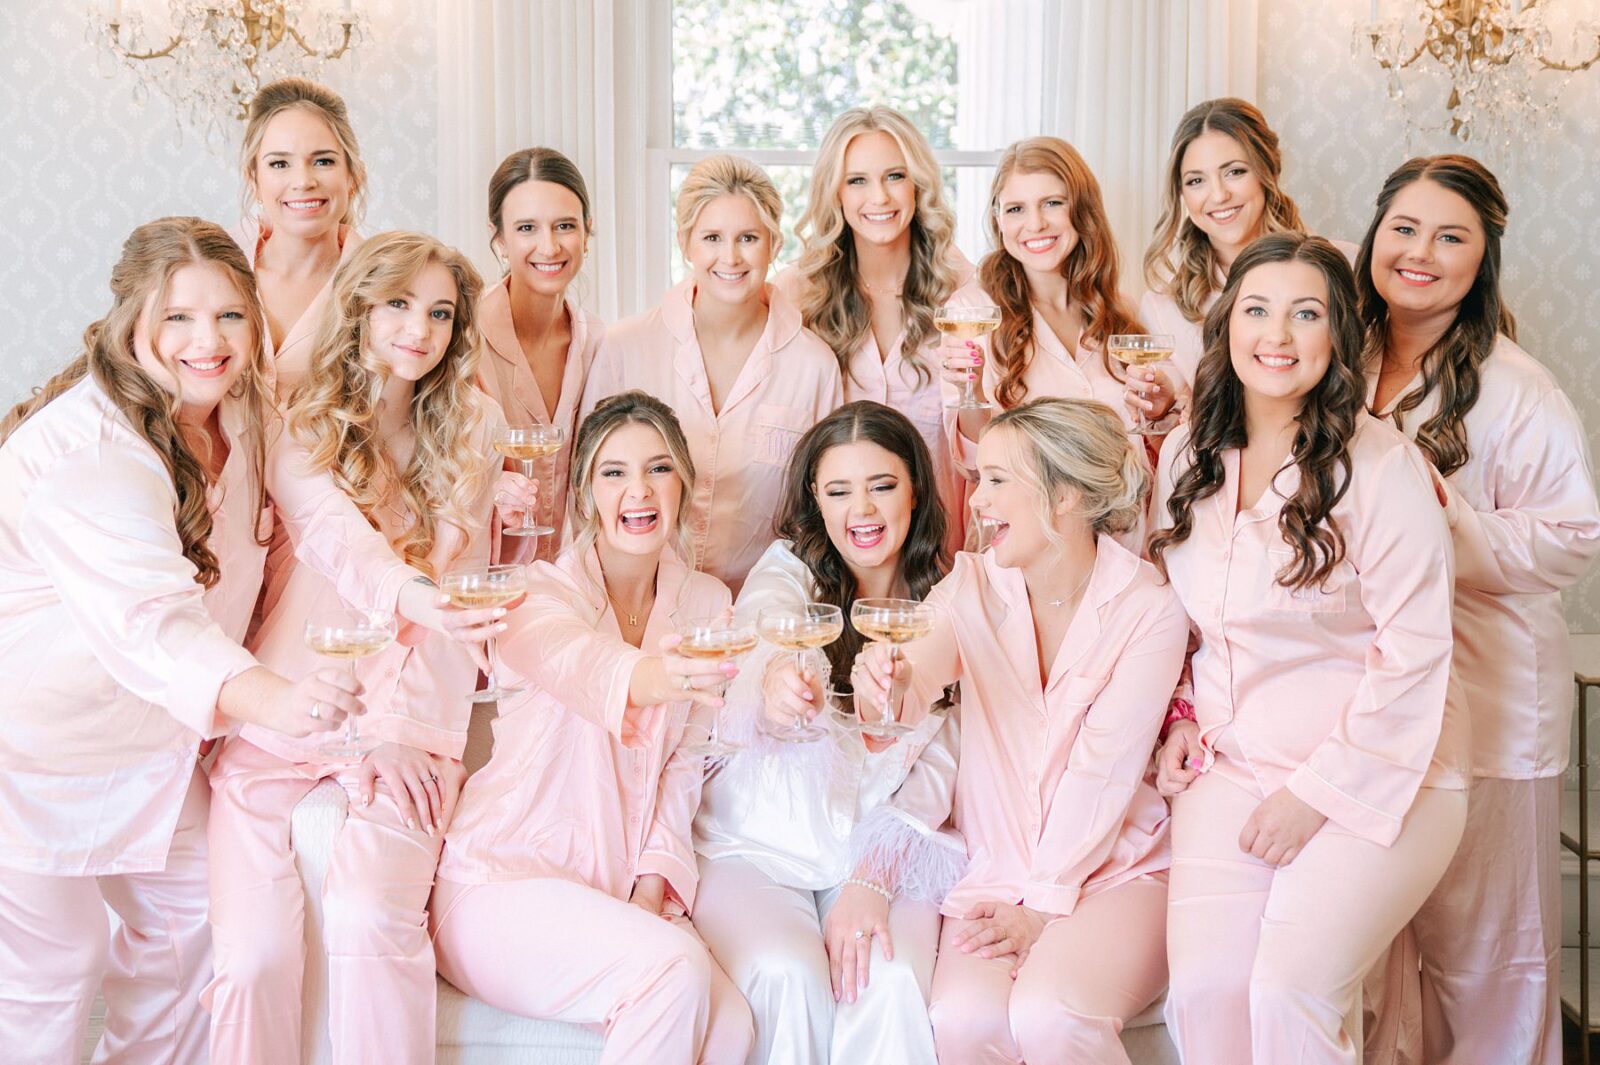 bride and bridesmaids champagne toast, getting ready at woodbine mansion, bridal suite at woodbine mansion, bride getting ready, large wedding party, twelve bridesmaids, at Woodbine mansion wedding venue, photography by Tara Lyons Photography, The event shop wedding planner